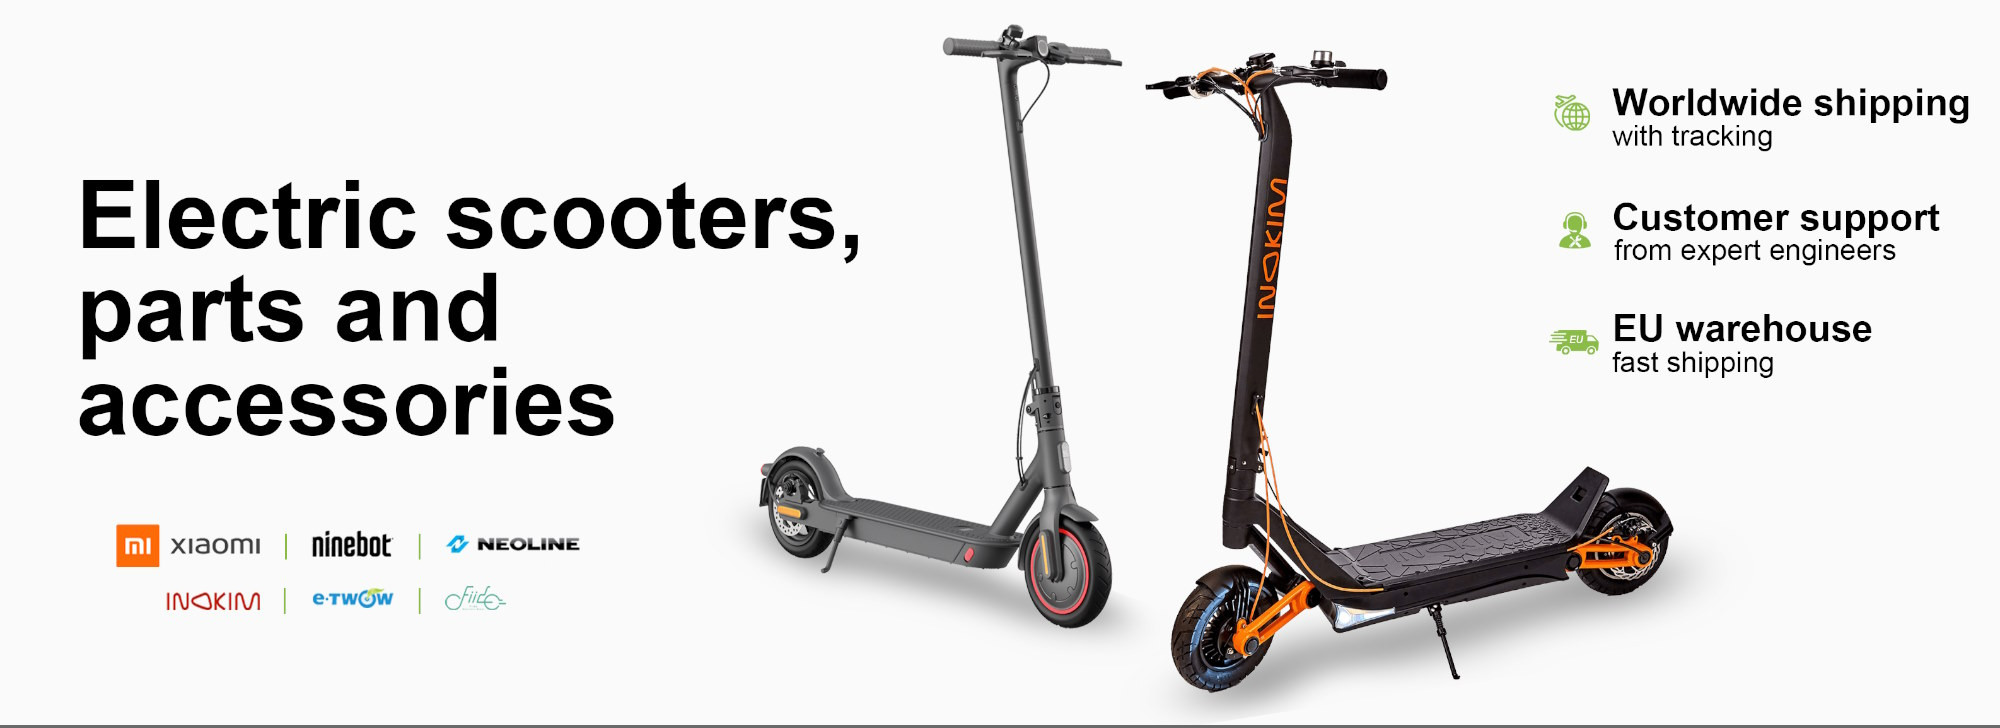 Segway's Ninebot P65 electric scooter has never sold for less with